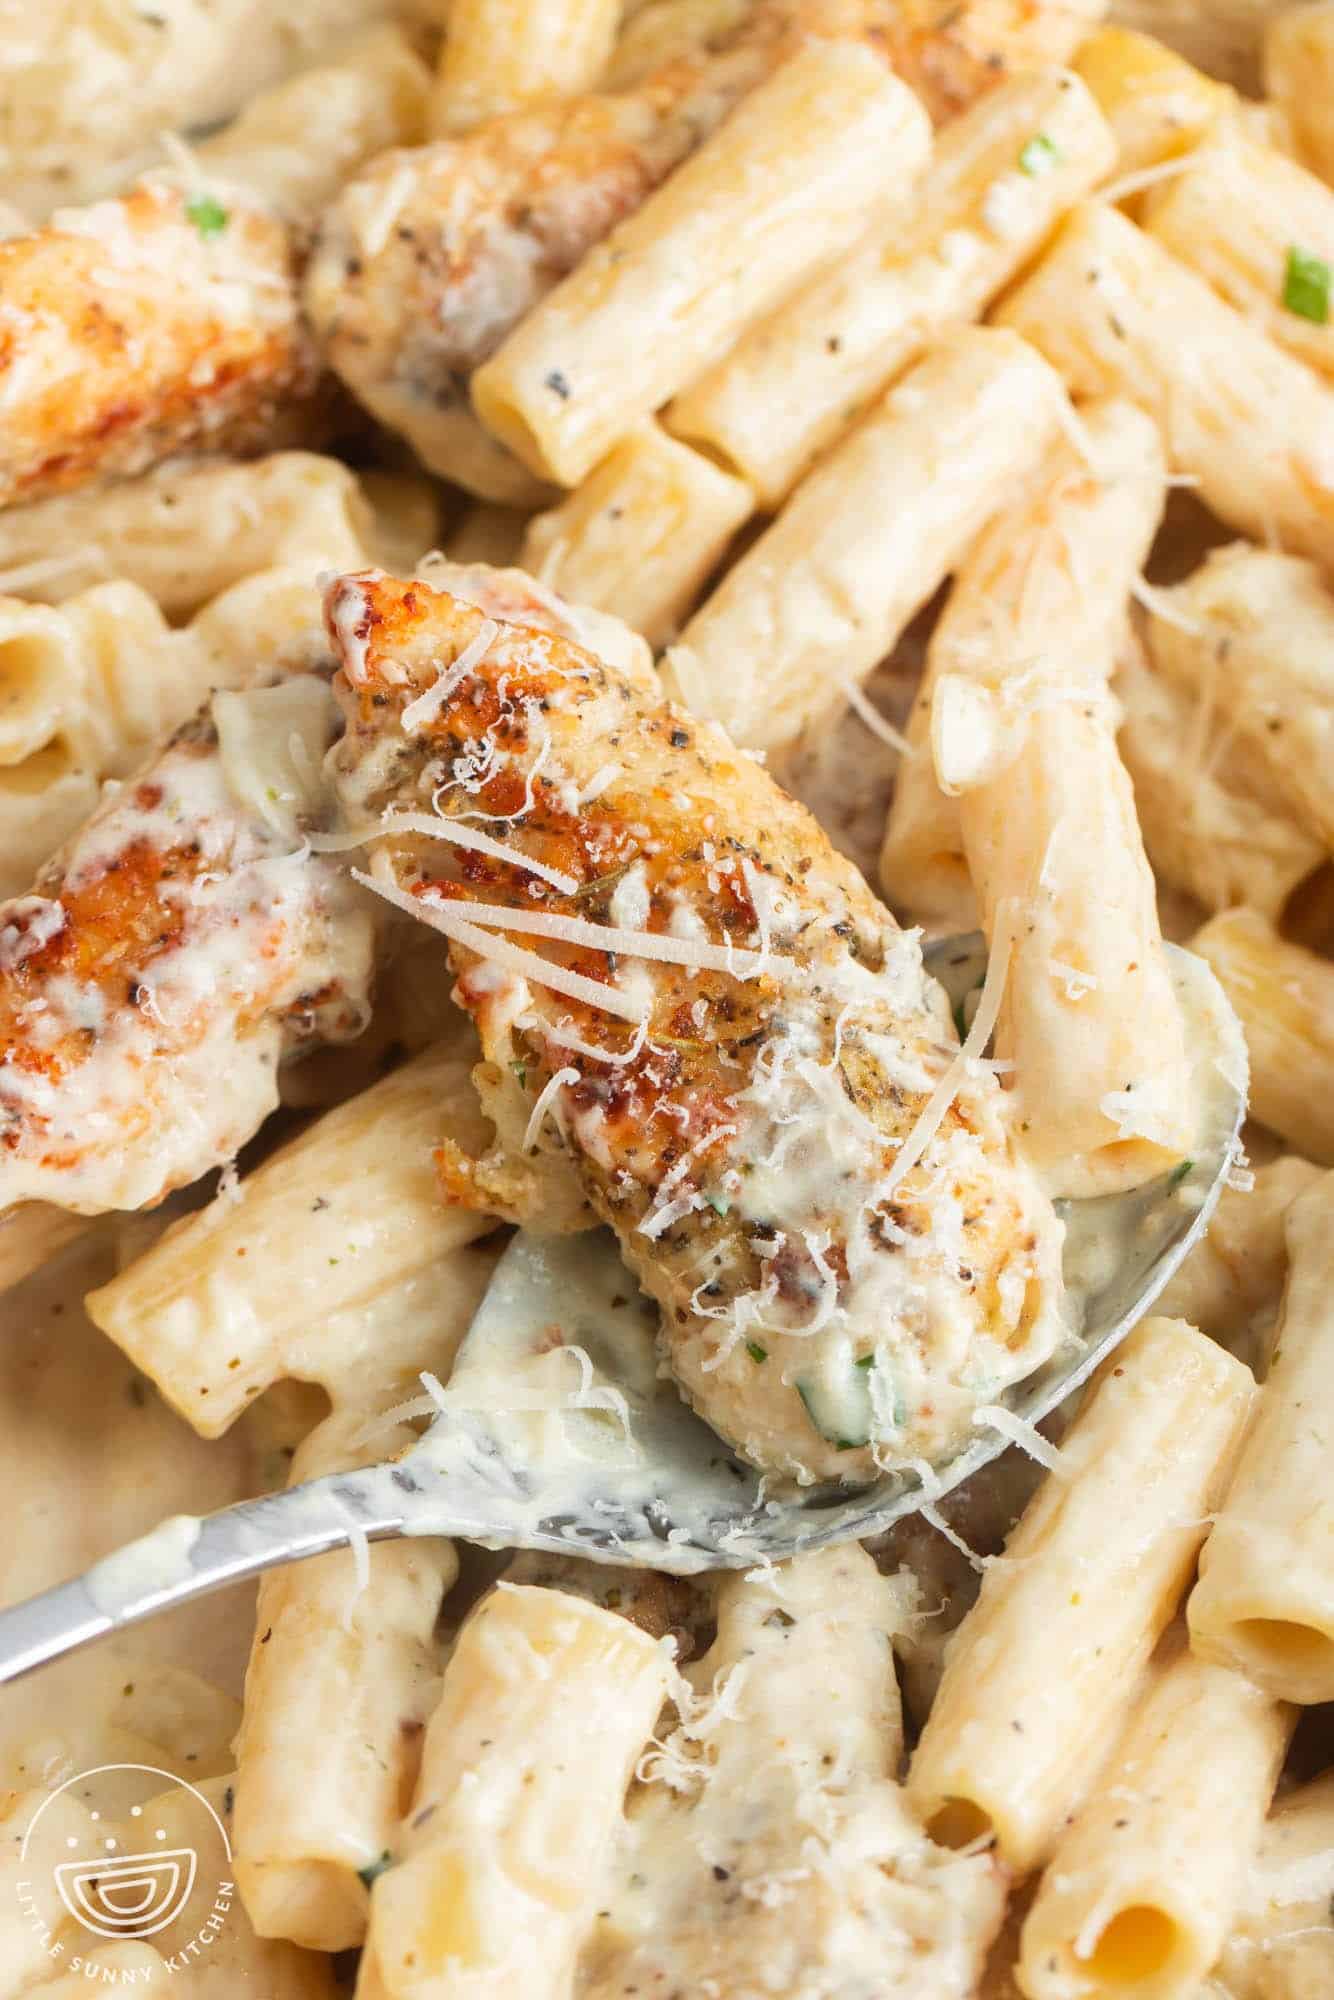 closeup of a pan of creamy parmesan chicken pasta. A spoon is holding up a piece of chicken that is topped with grated parmesan cheese.